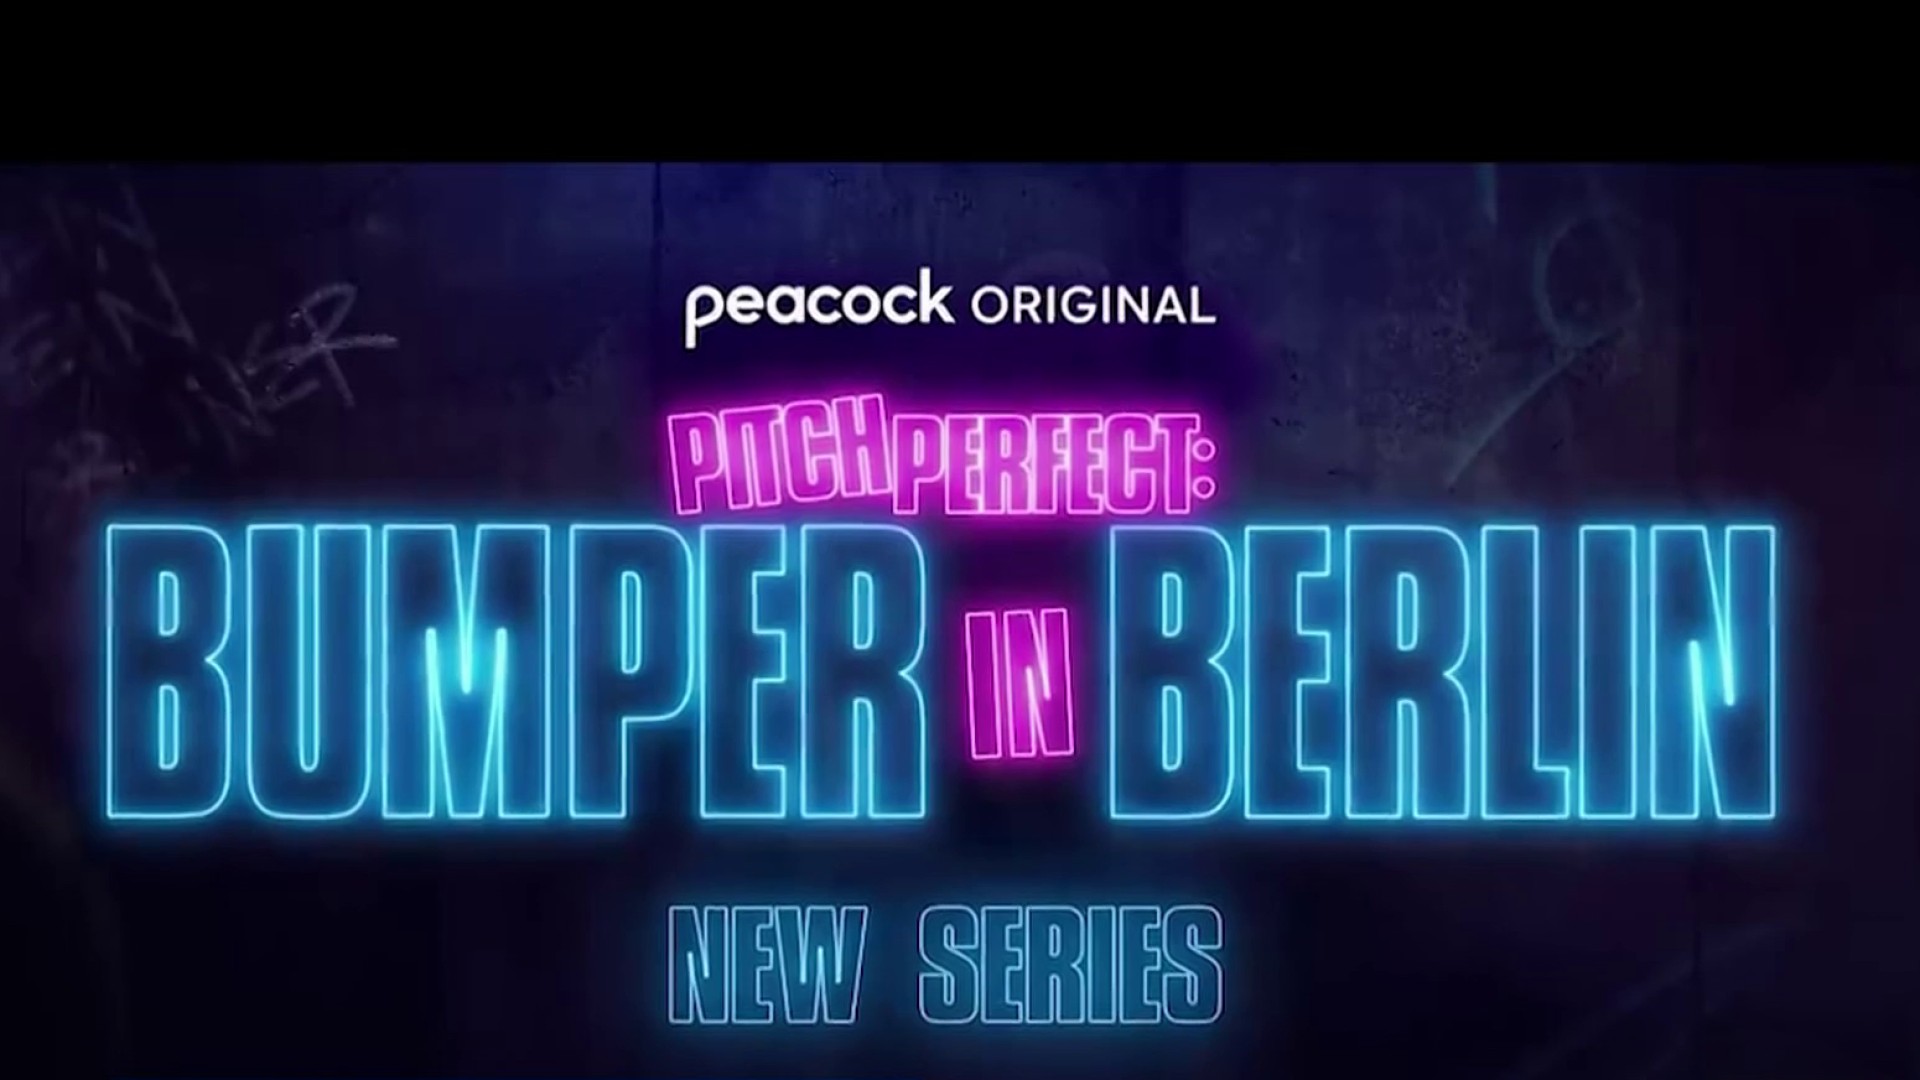 Pitch Perfect: Bumper in Berlin' Premieres Wednesday on Peacock